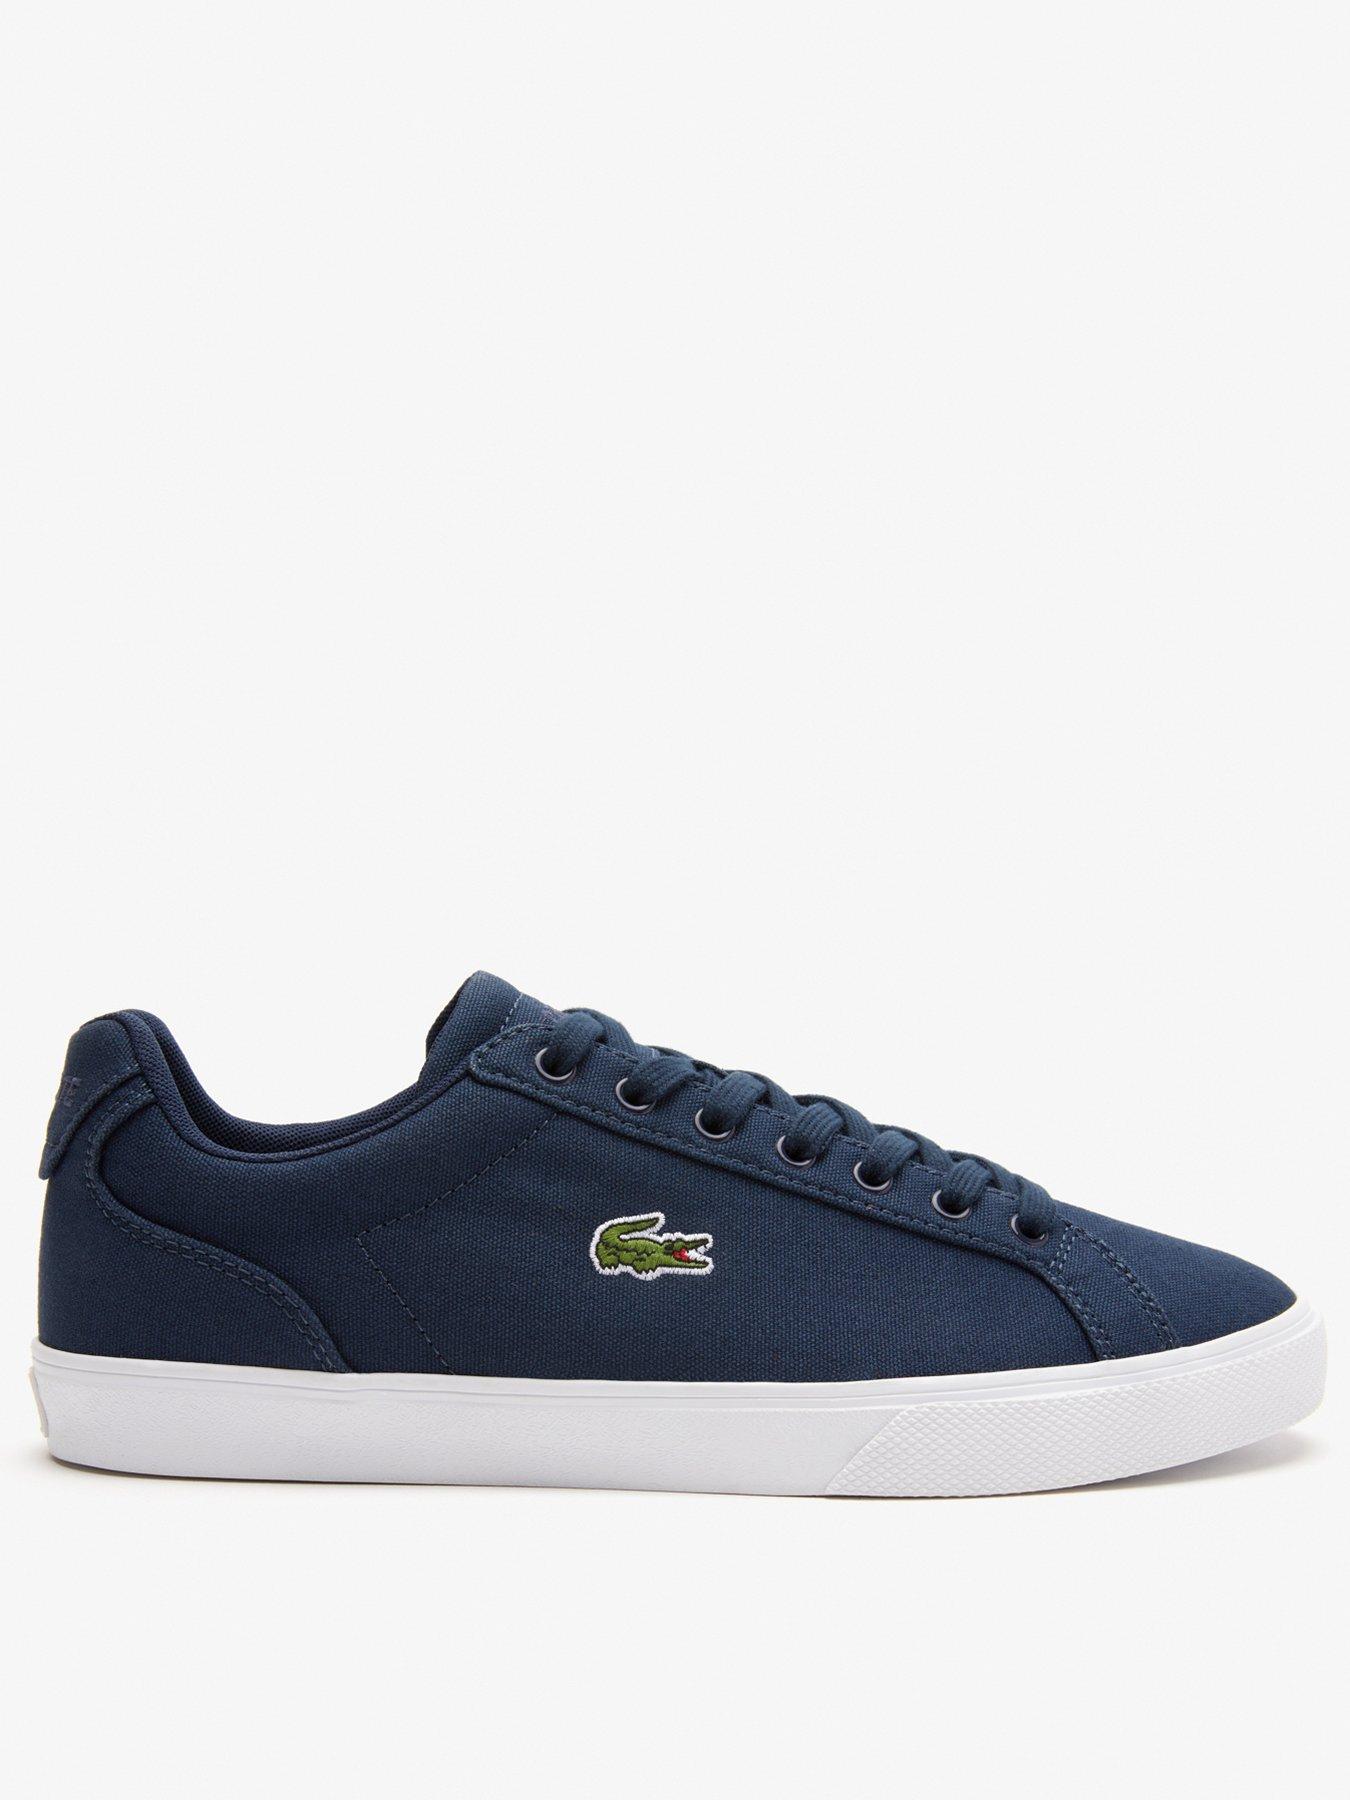 Lacoste Lerond Pro Bl 123 Trainer - Navy | very.co.uk